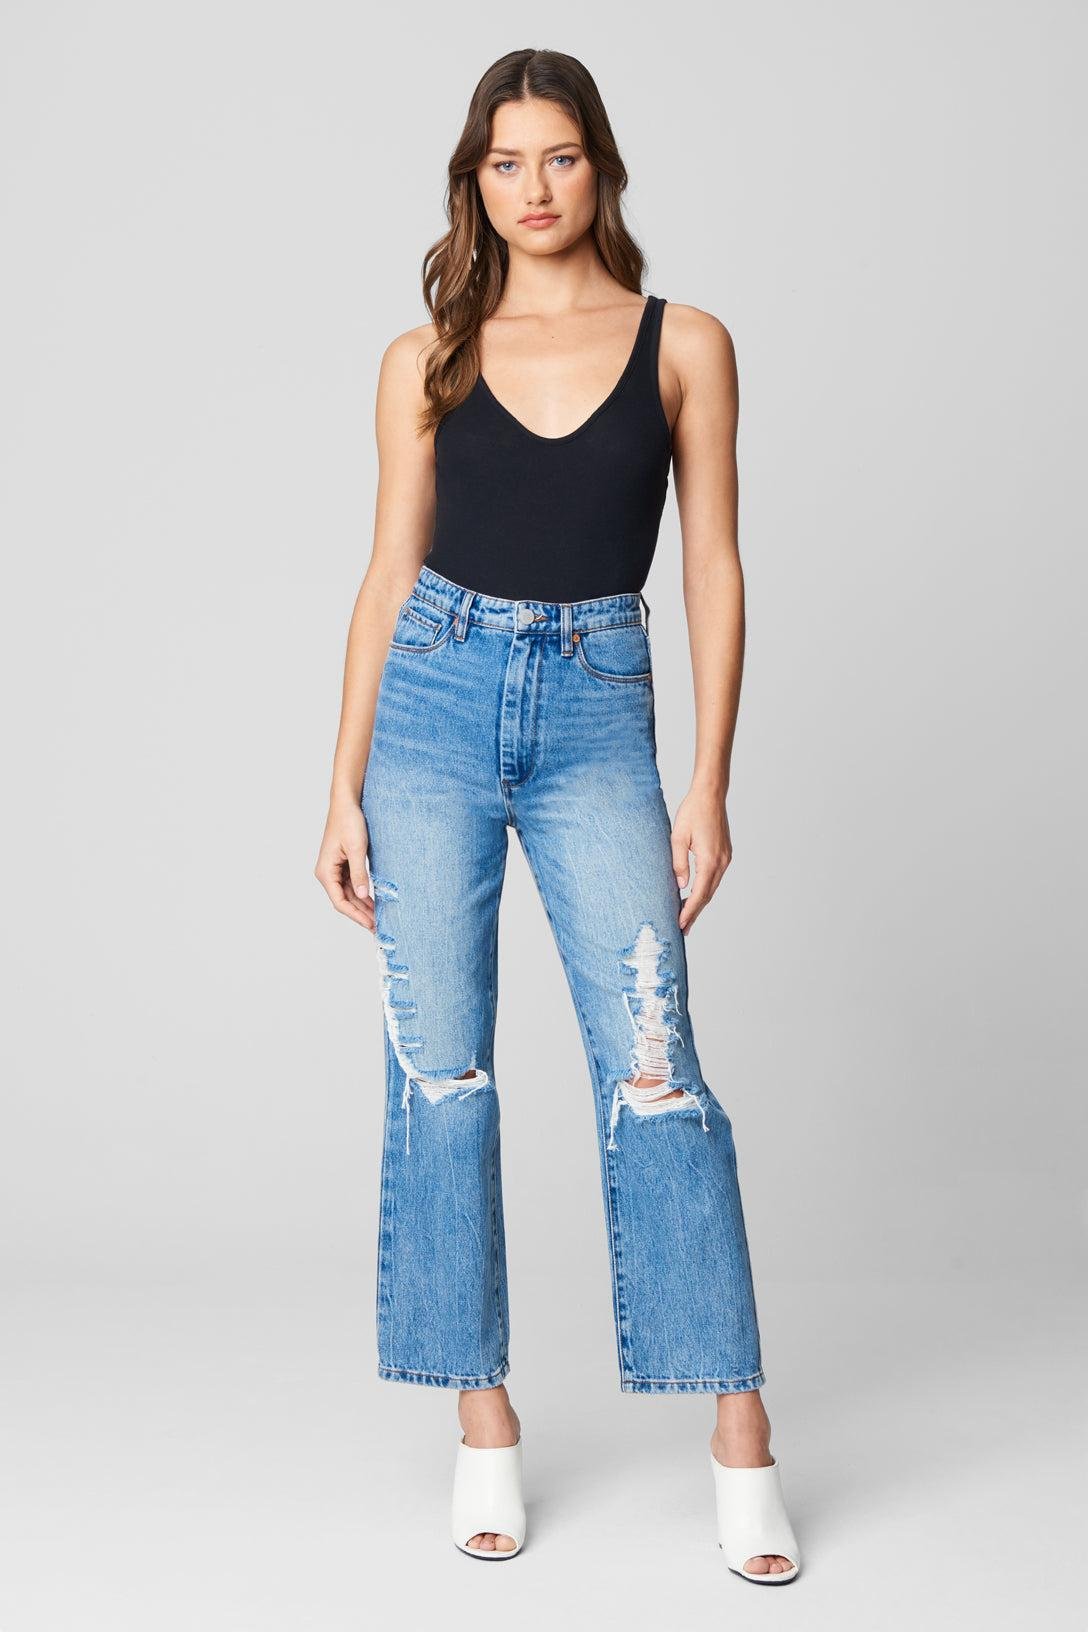 Blank NYC The Baxter Jeans by BLANK NYC